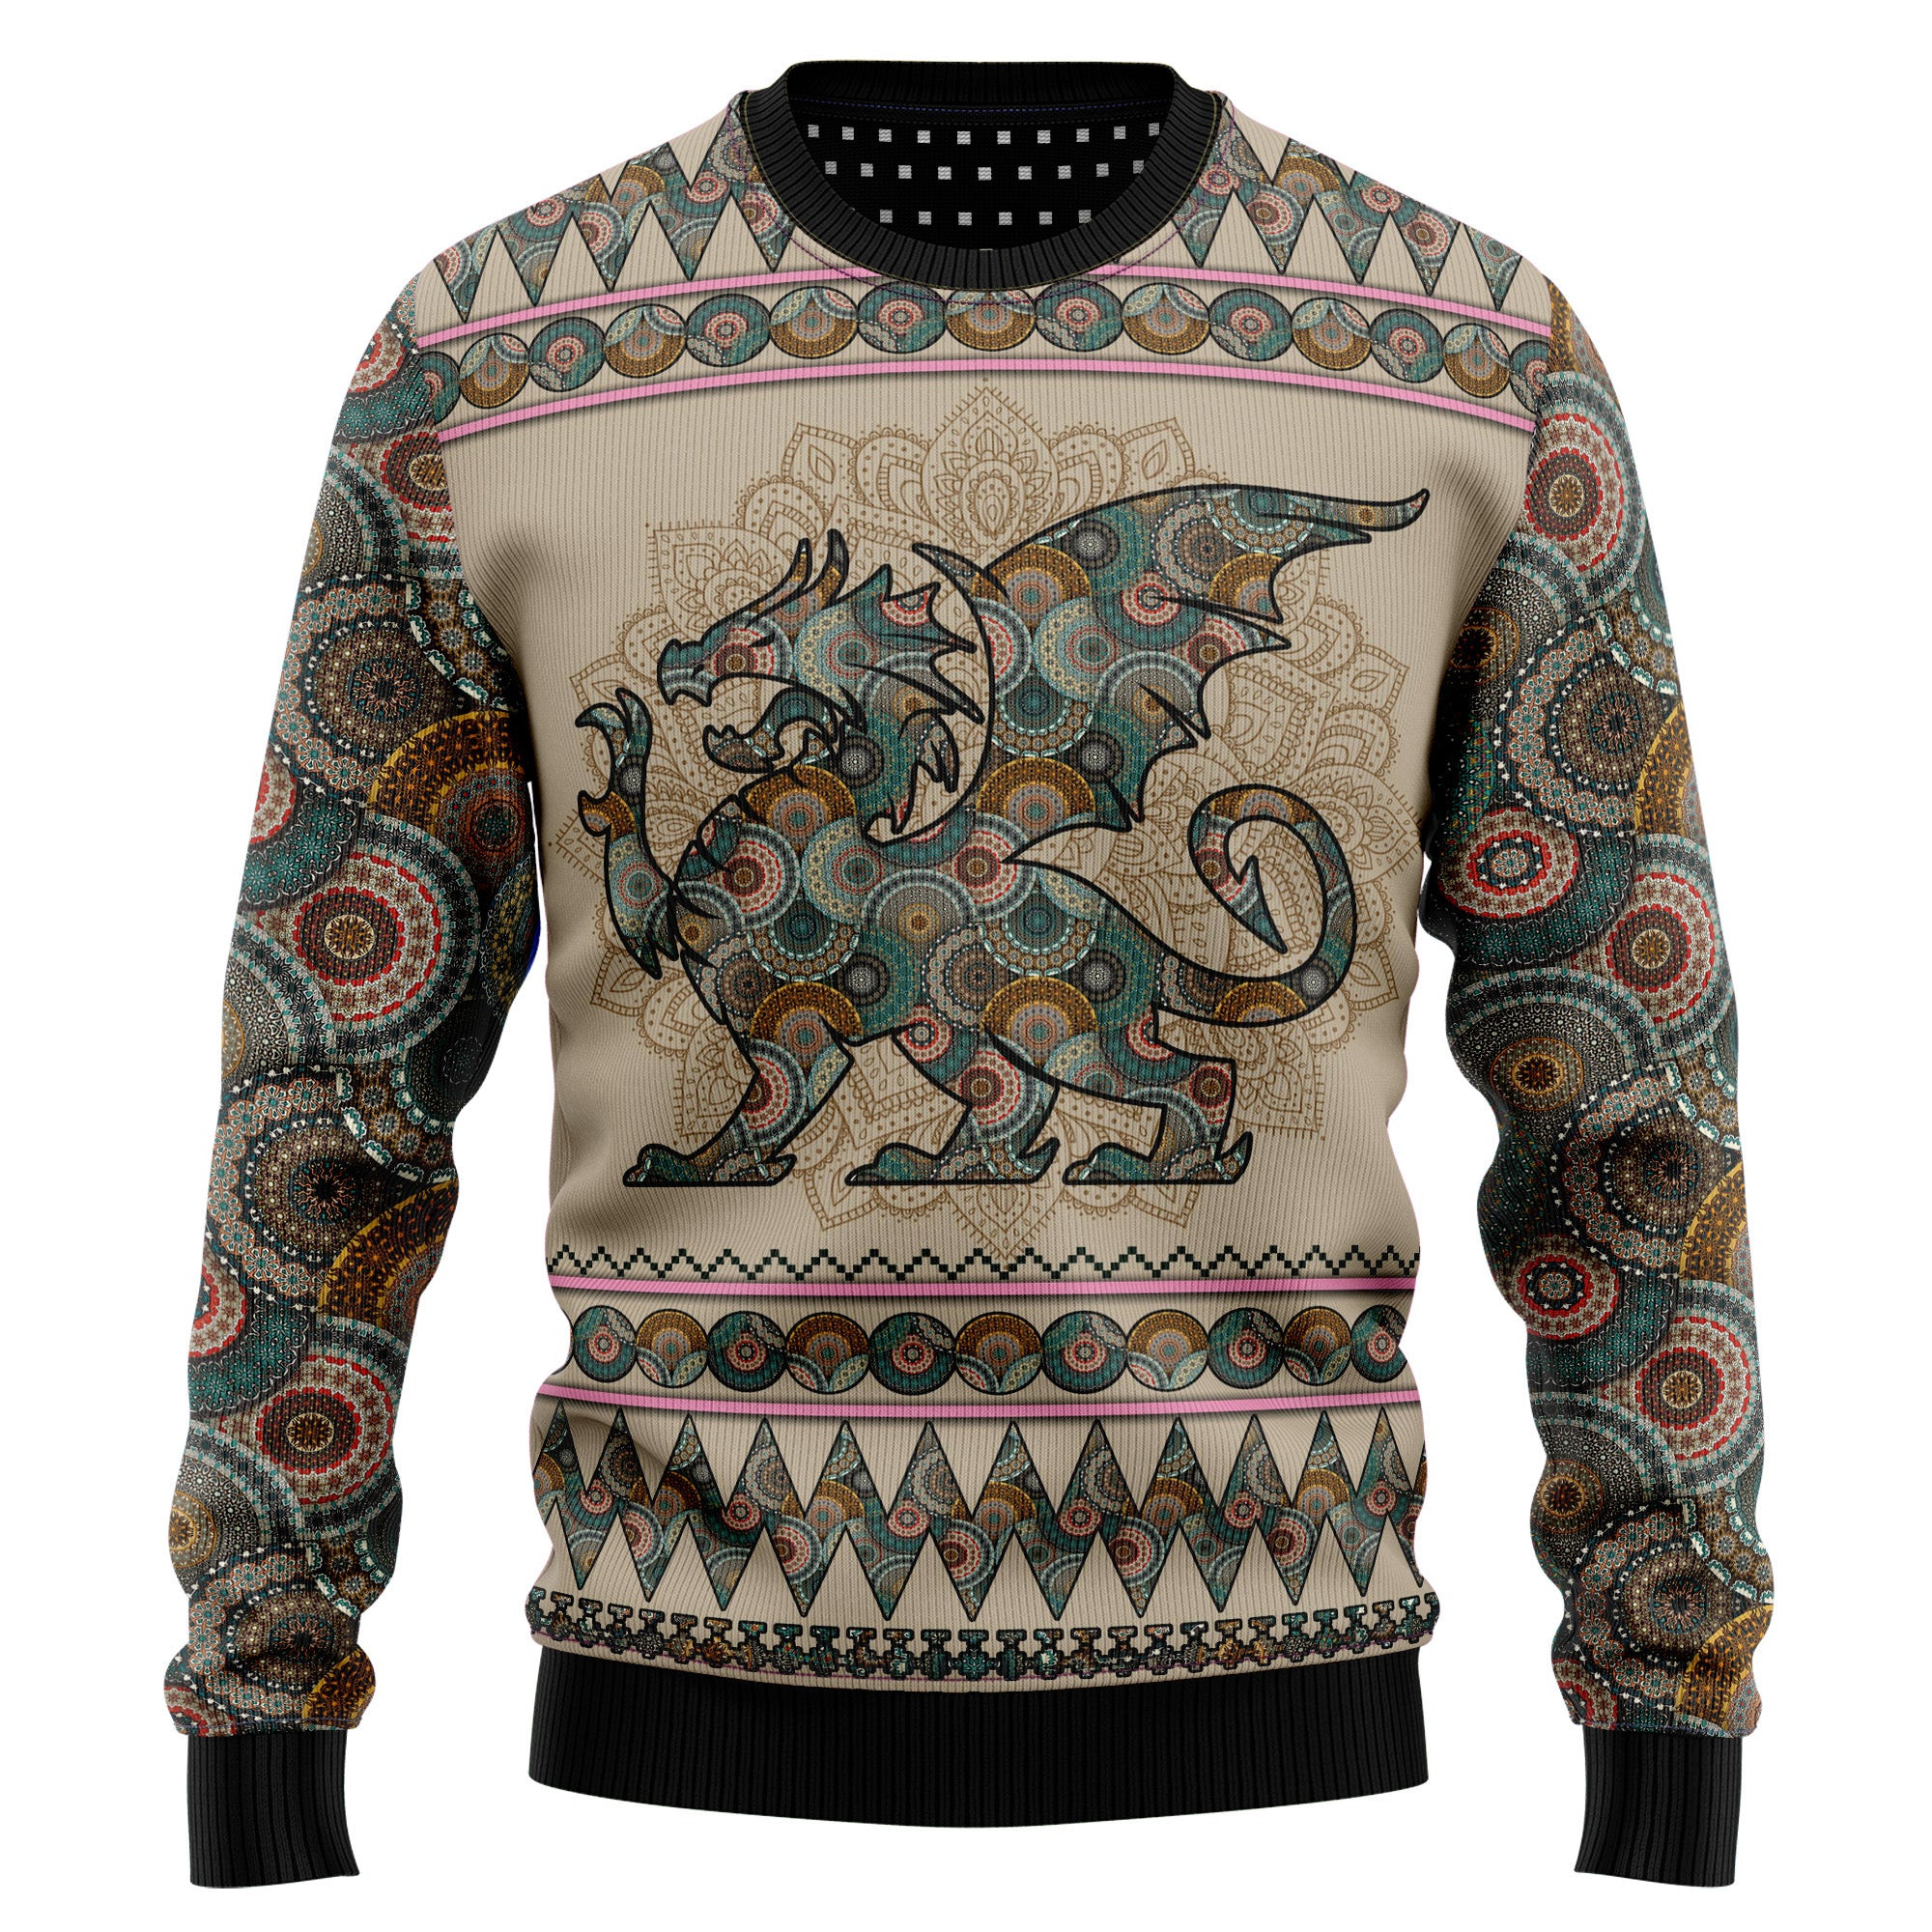 Dragon Mandala Ugly Christmas Sweater, Ugly Sweater For Men Women, Holiday Sweater